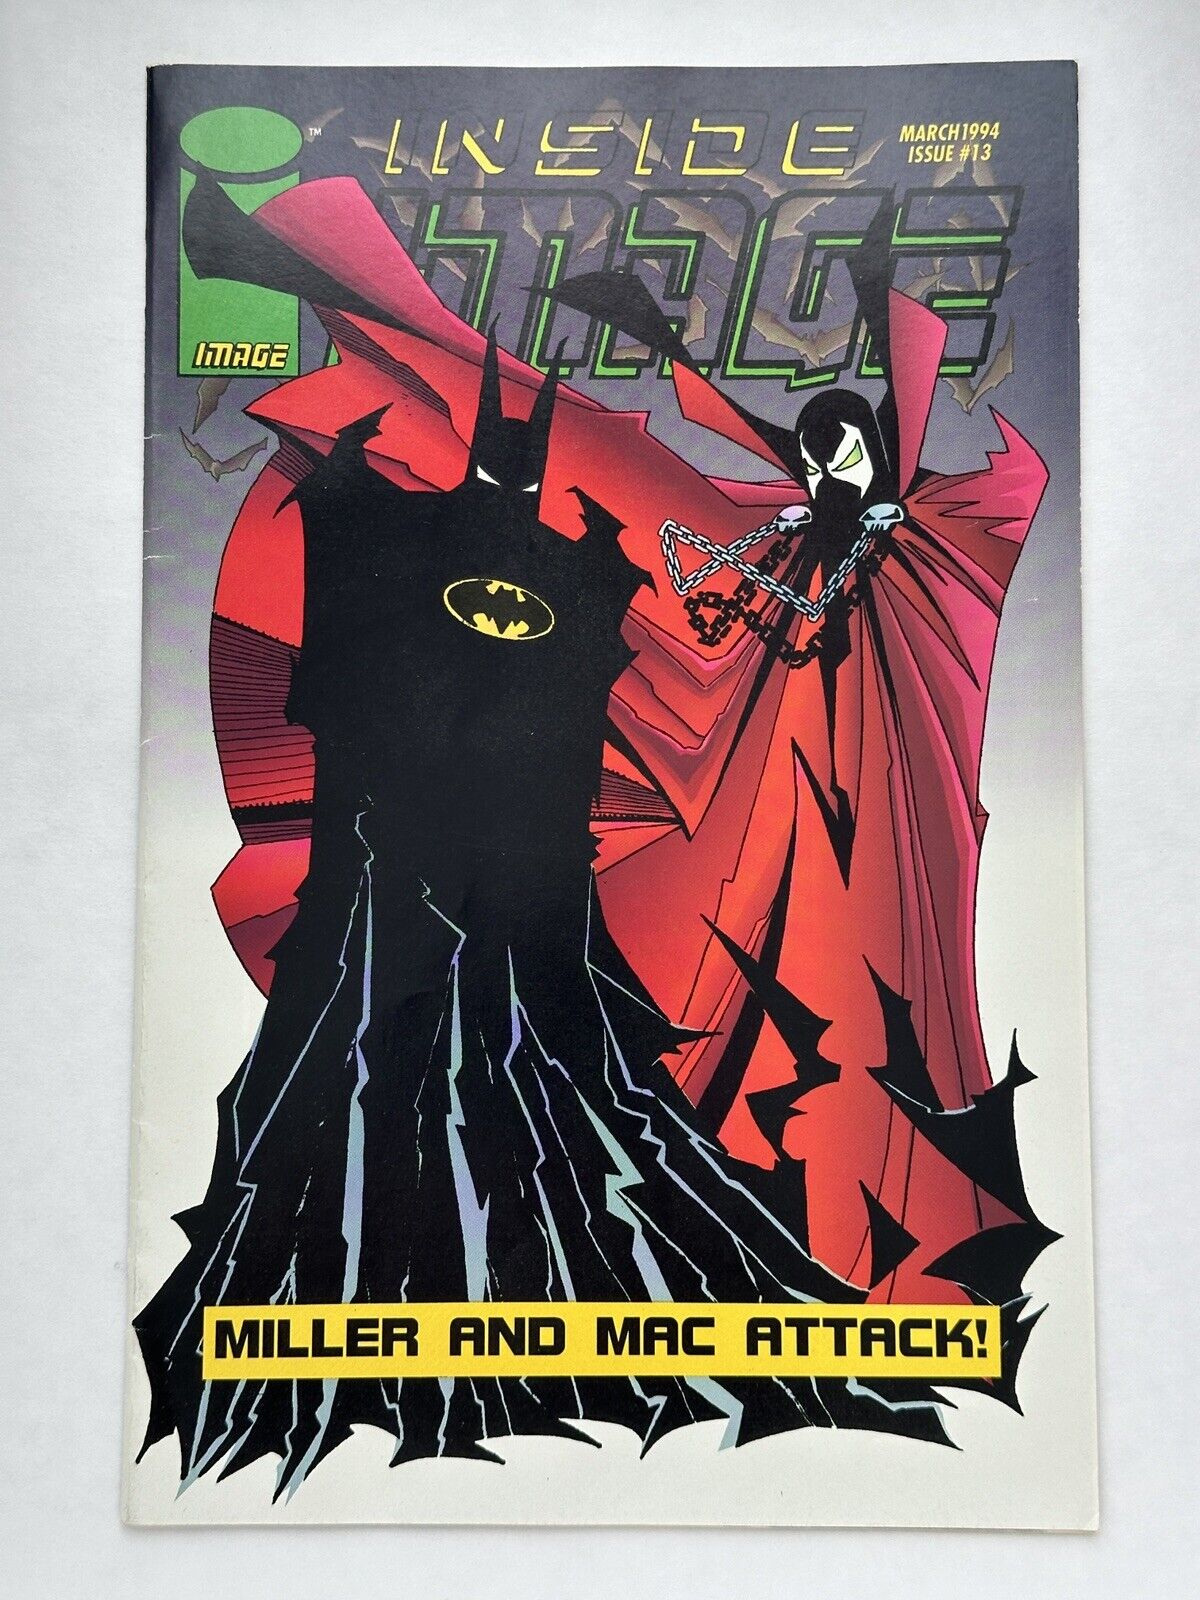 INSIDE IMAGE #13 MARCH 1994 BATMAN & SPAWN COVER & KINDRED ON THE BACK